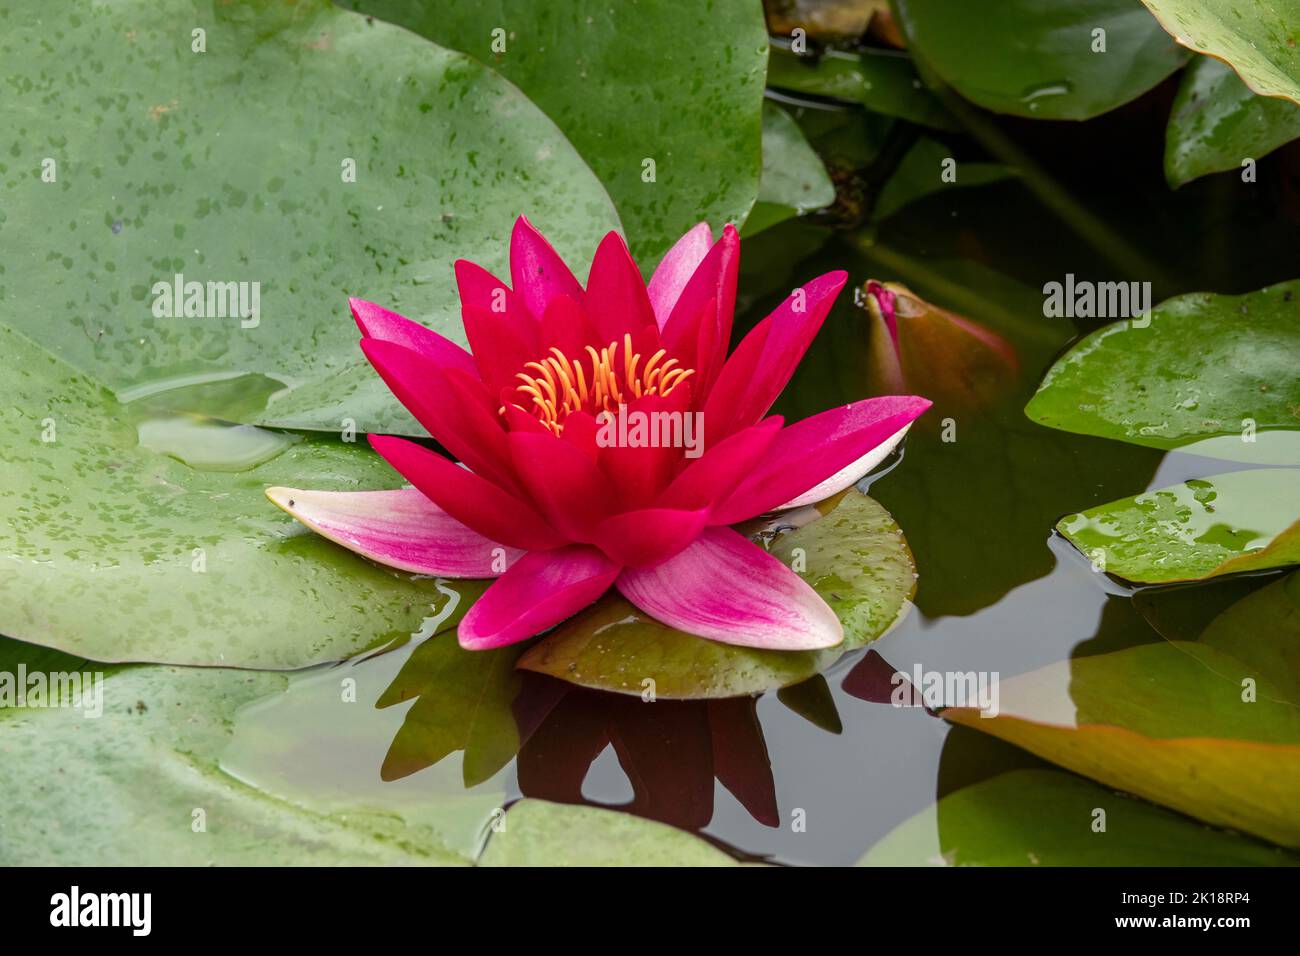 beautiful bright pink water lily amongst green lily pads in the water with reflection Stock Photo